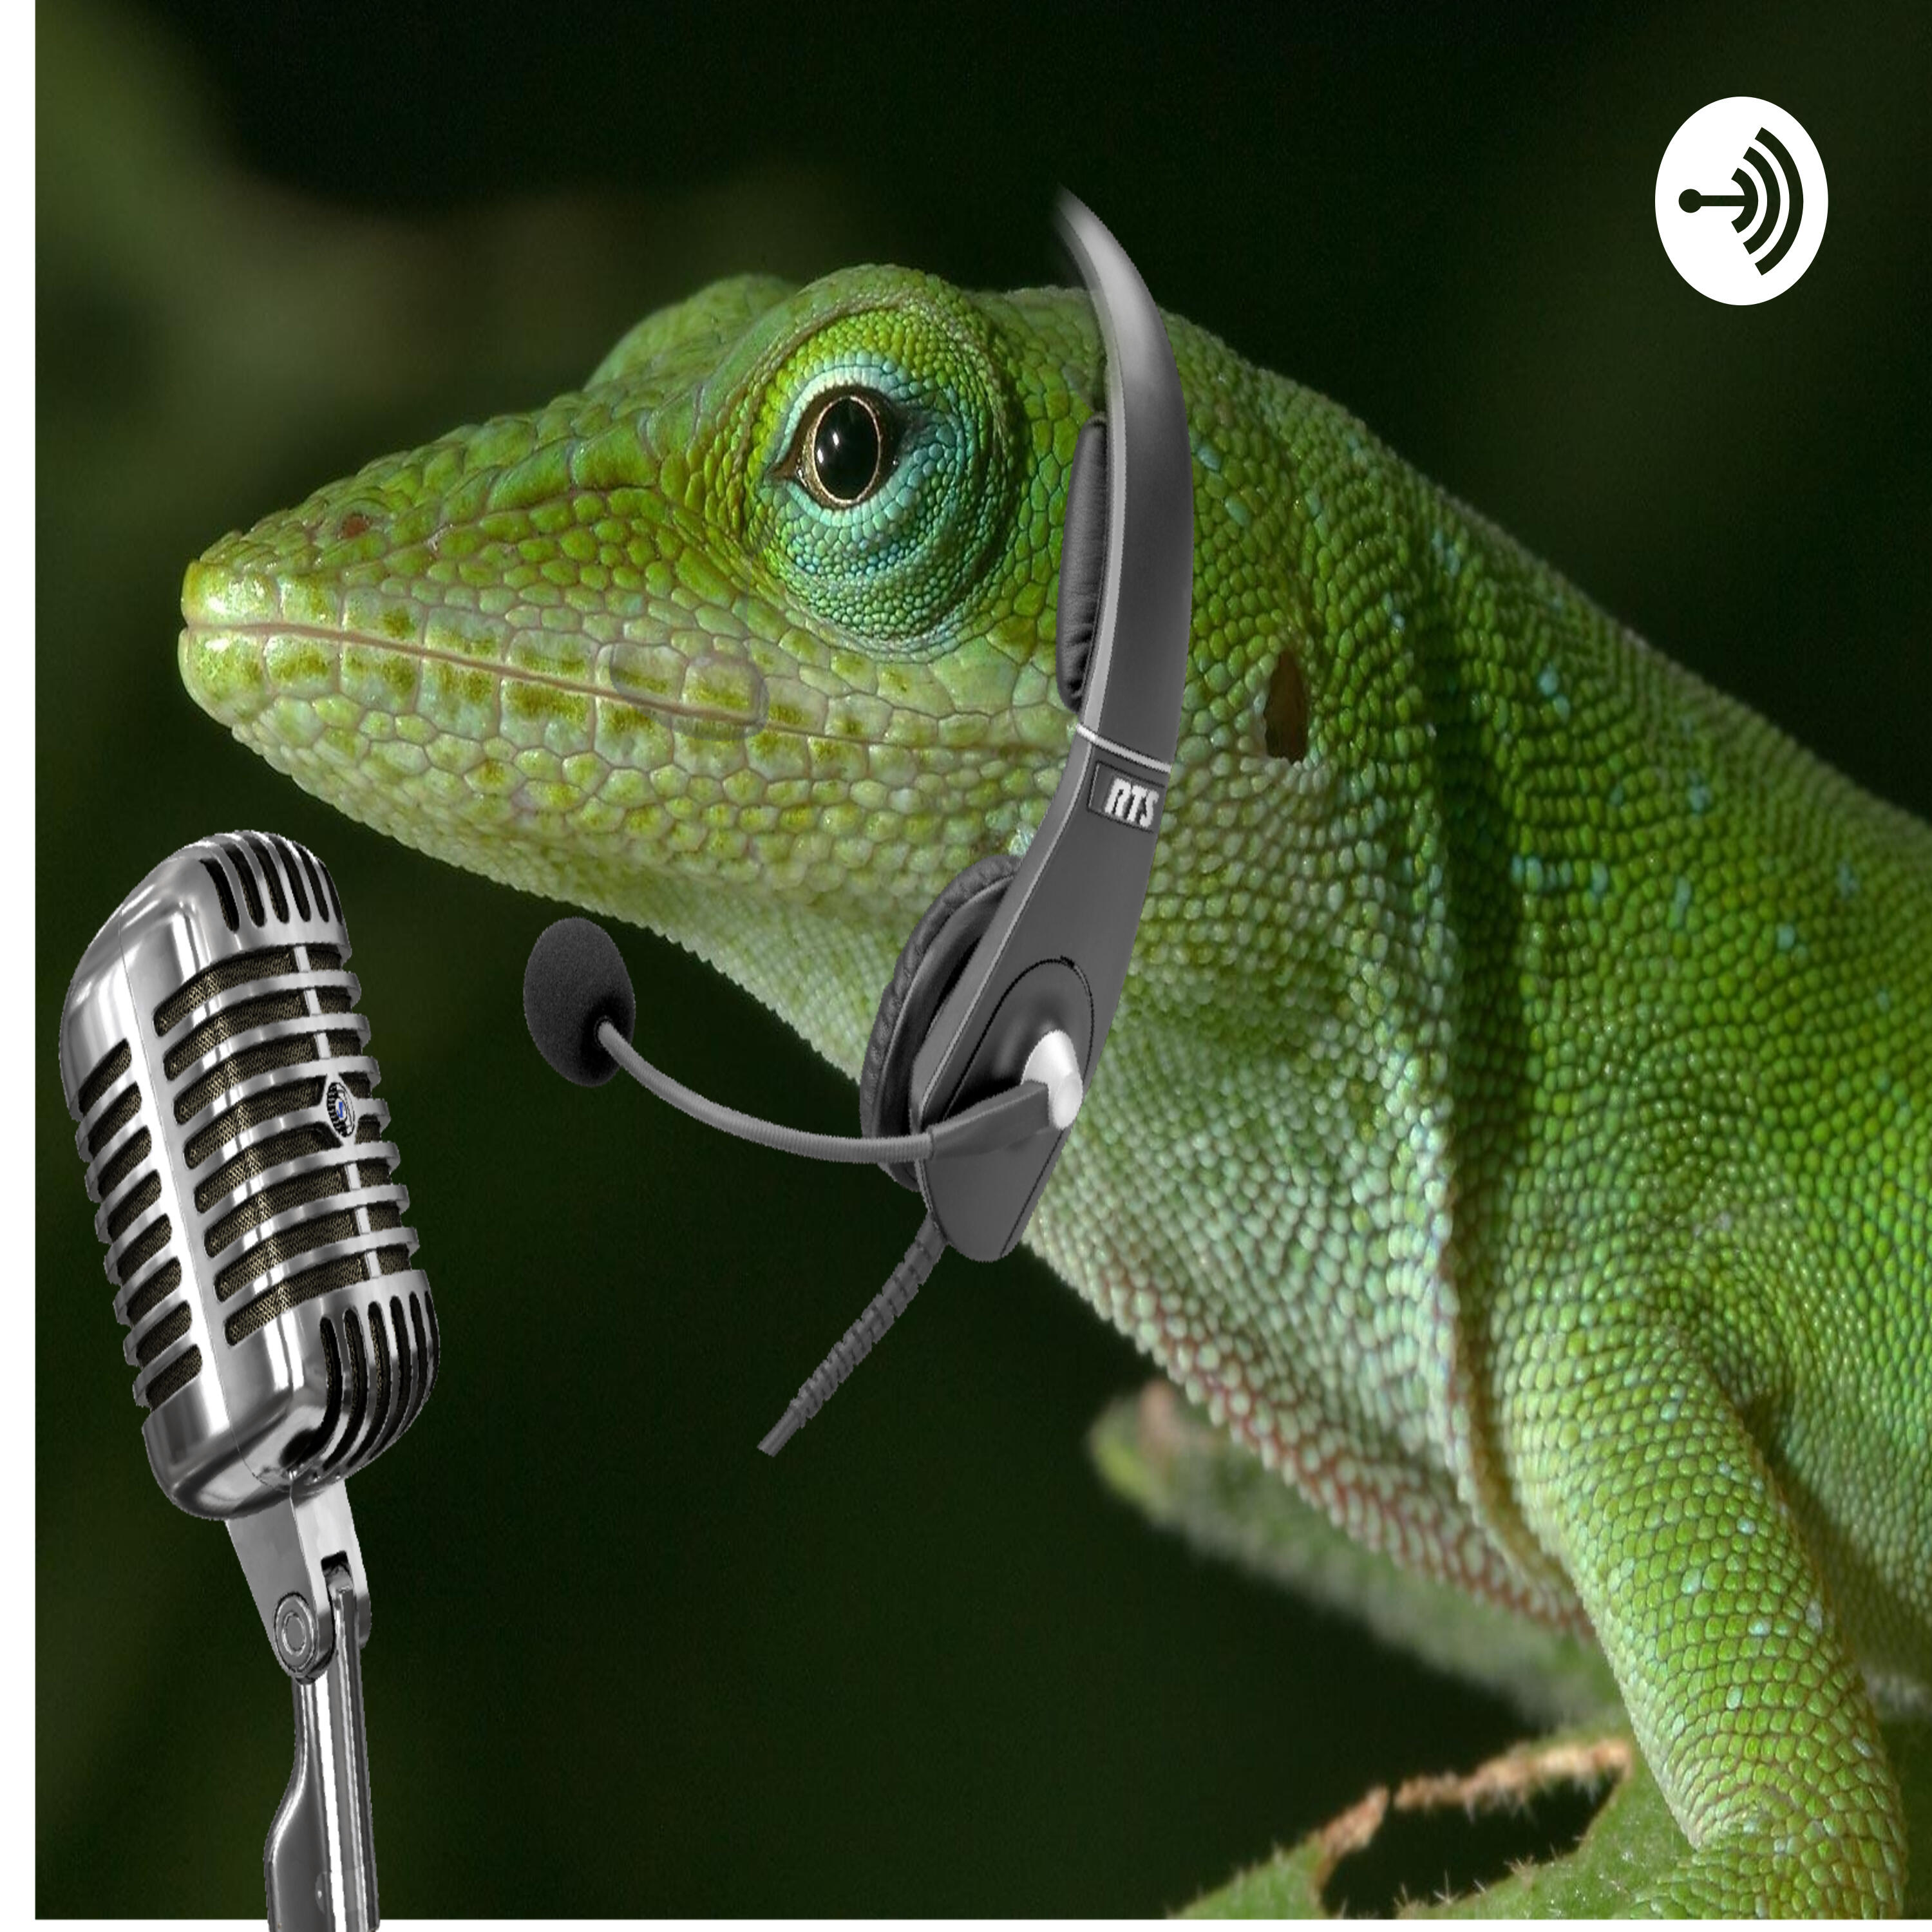 Anole Podcast Introduction - The Anole Podcast | iHeart